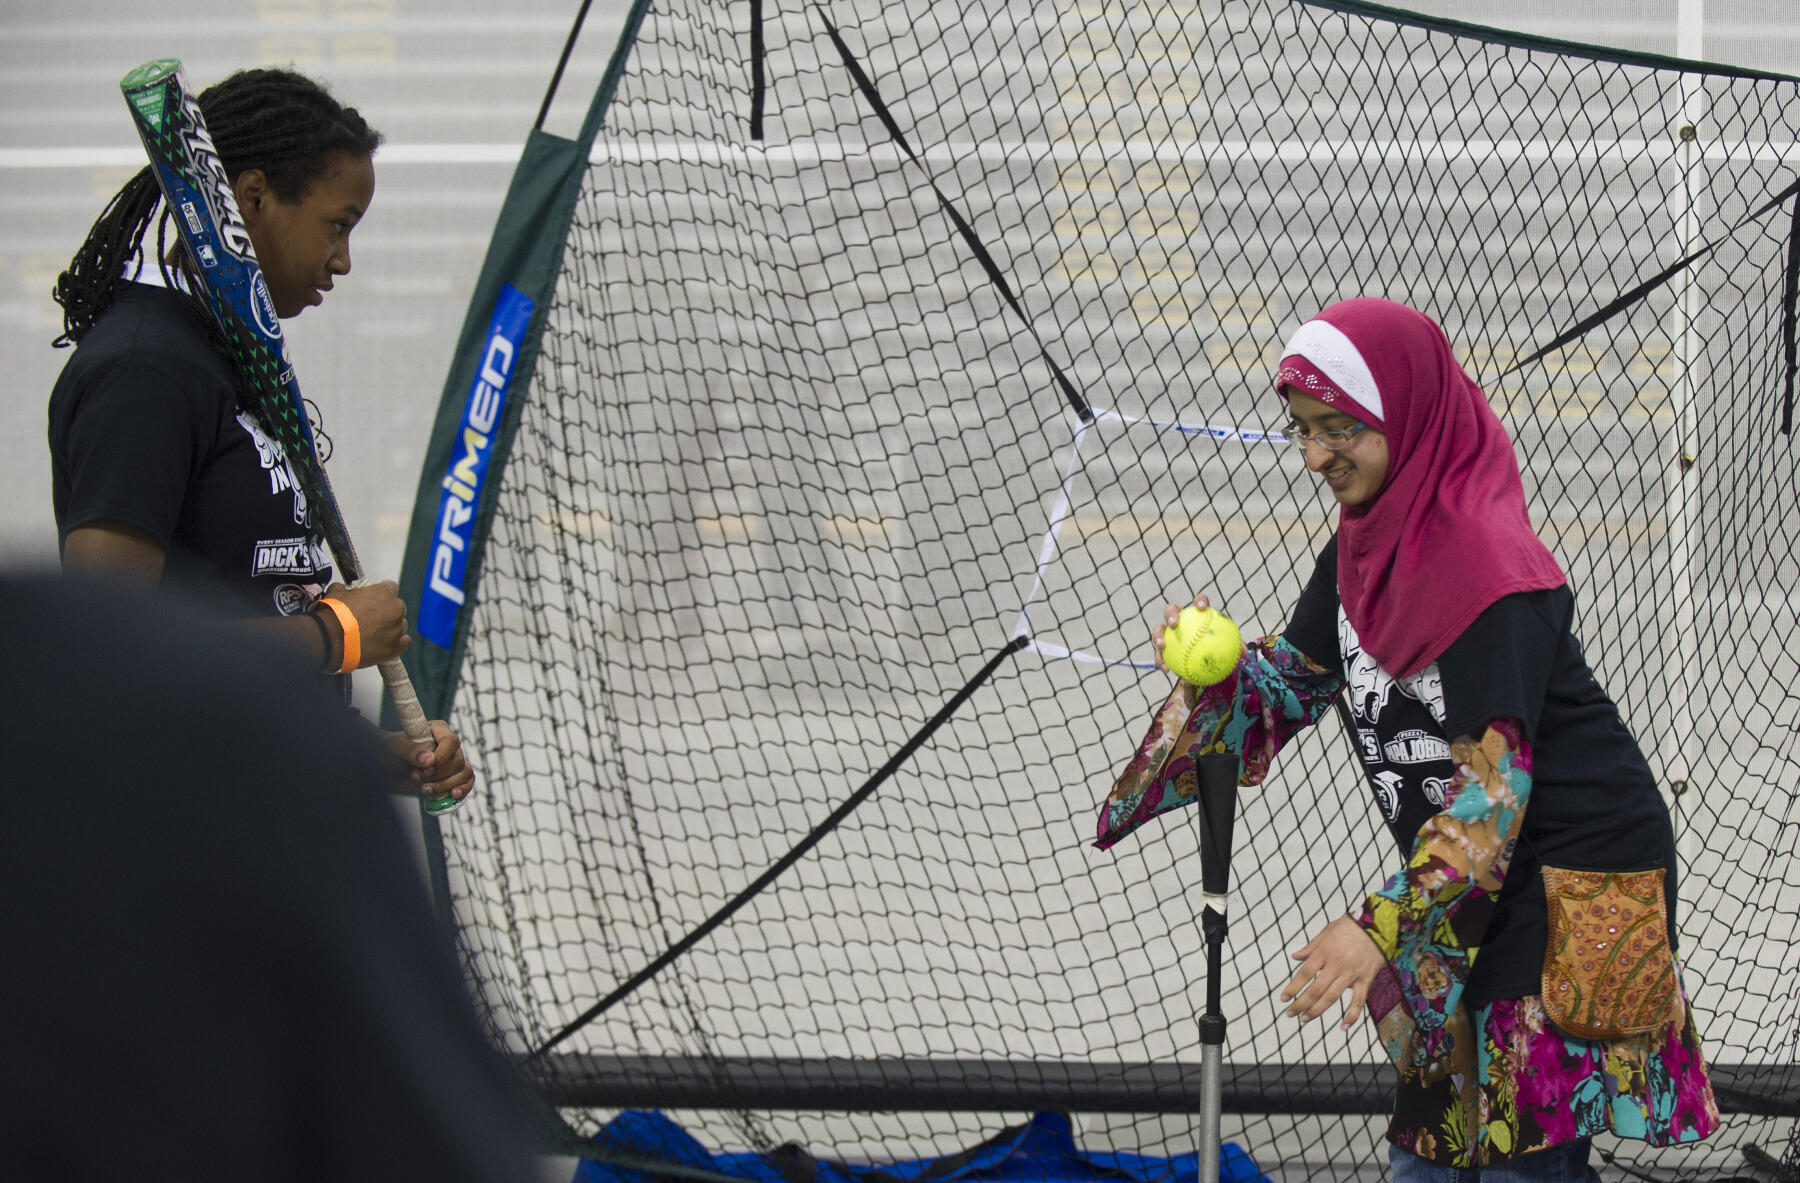 Farwa Hussain, a sophomore majoring in math education in the School of Education, helps Richmond Public Schools students as they try out "Swing Tracker" technology that measures how fast they swing the bat.
